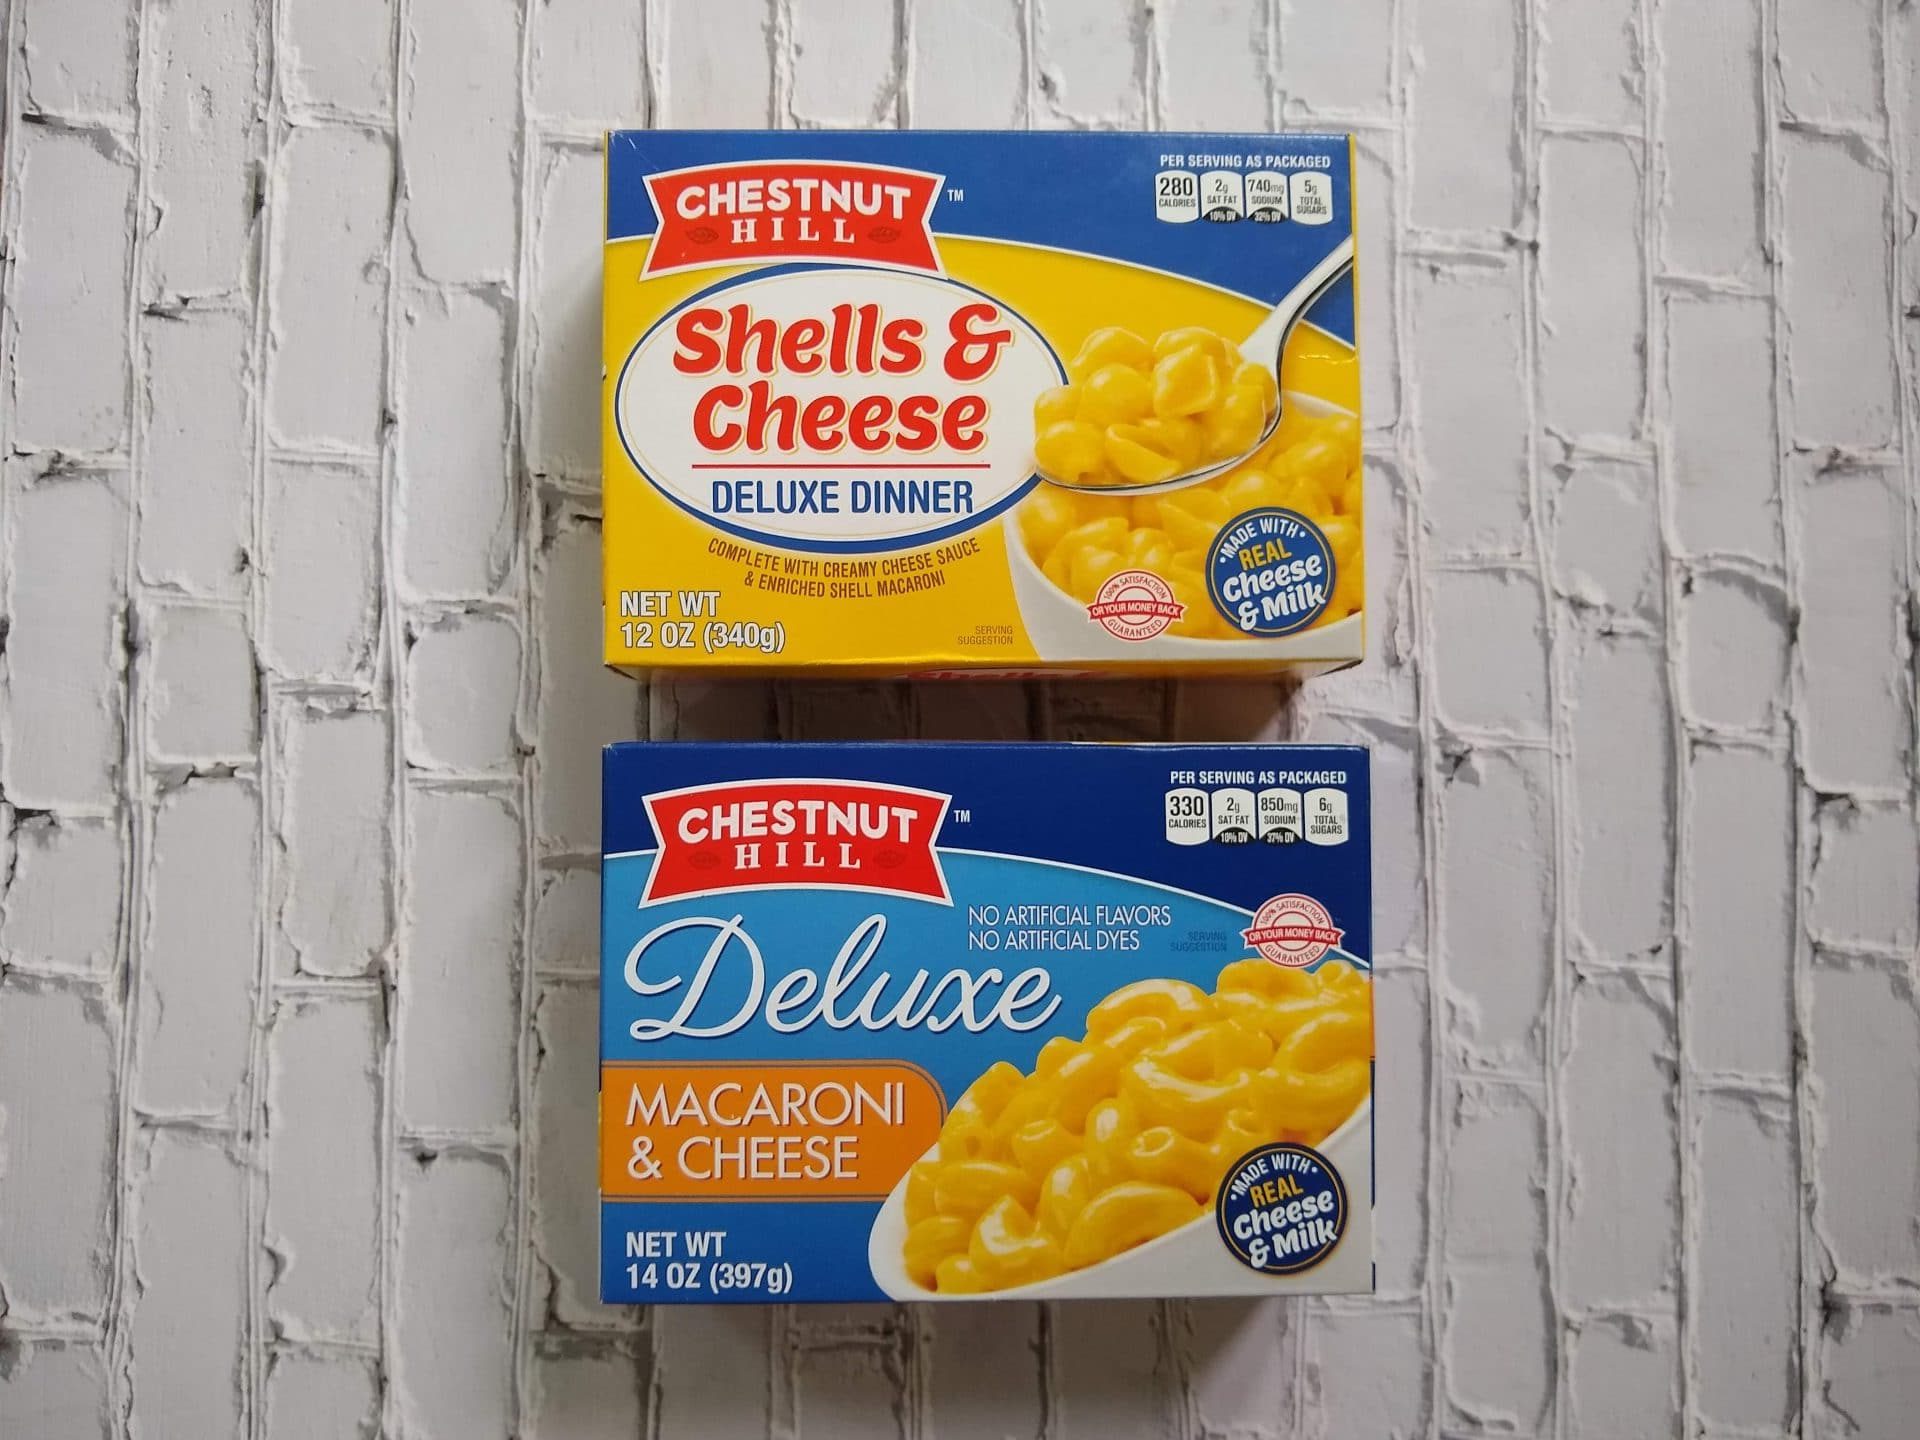 Chestnut Hill Shells & Cheese and Chestnut Hill Deluxe Macaroni & Cheese